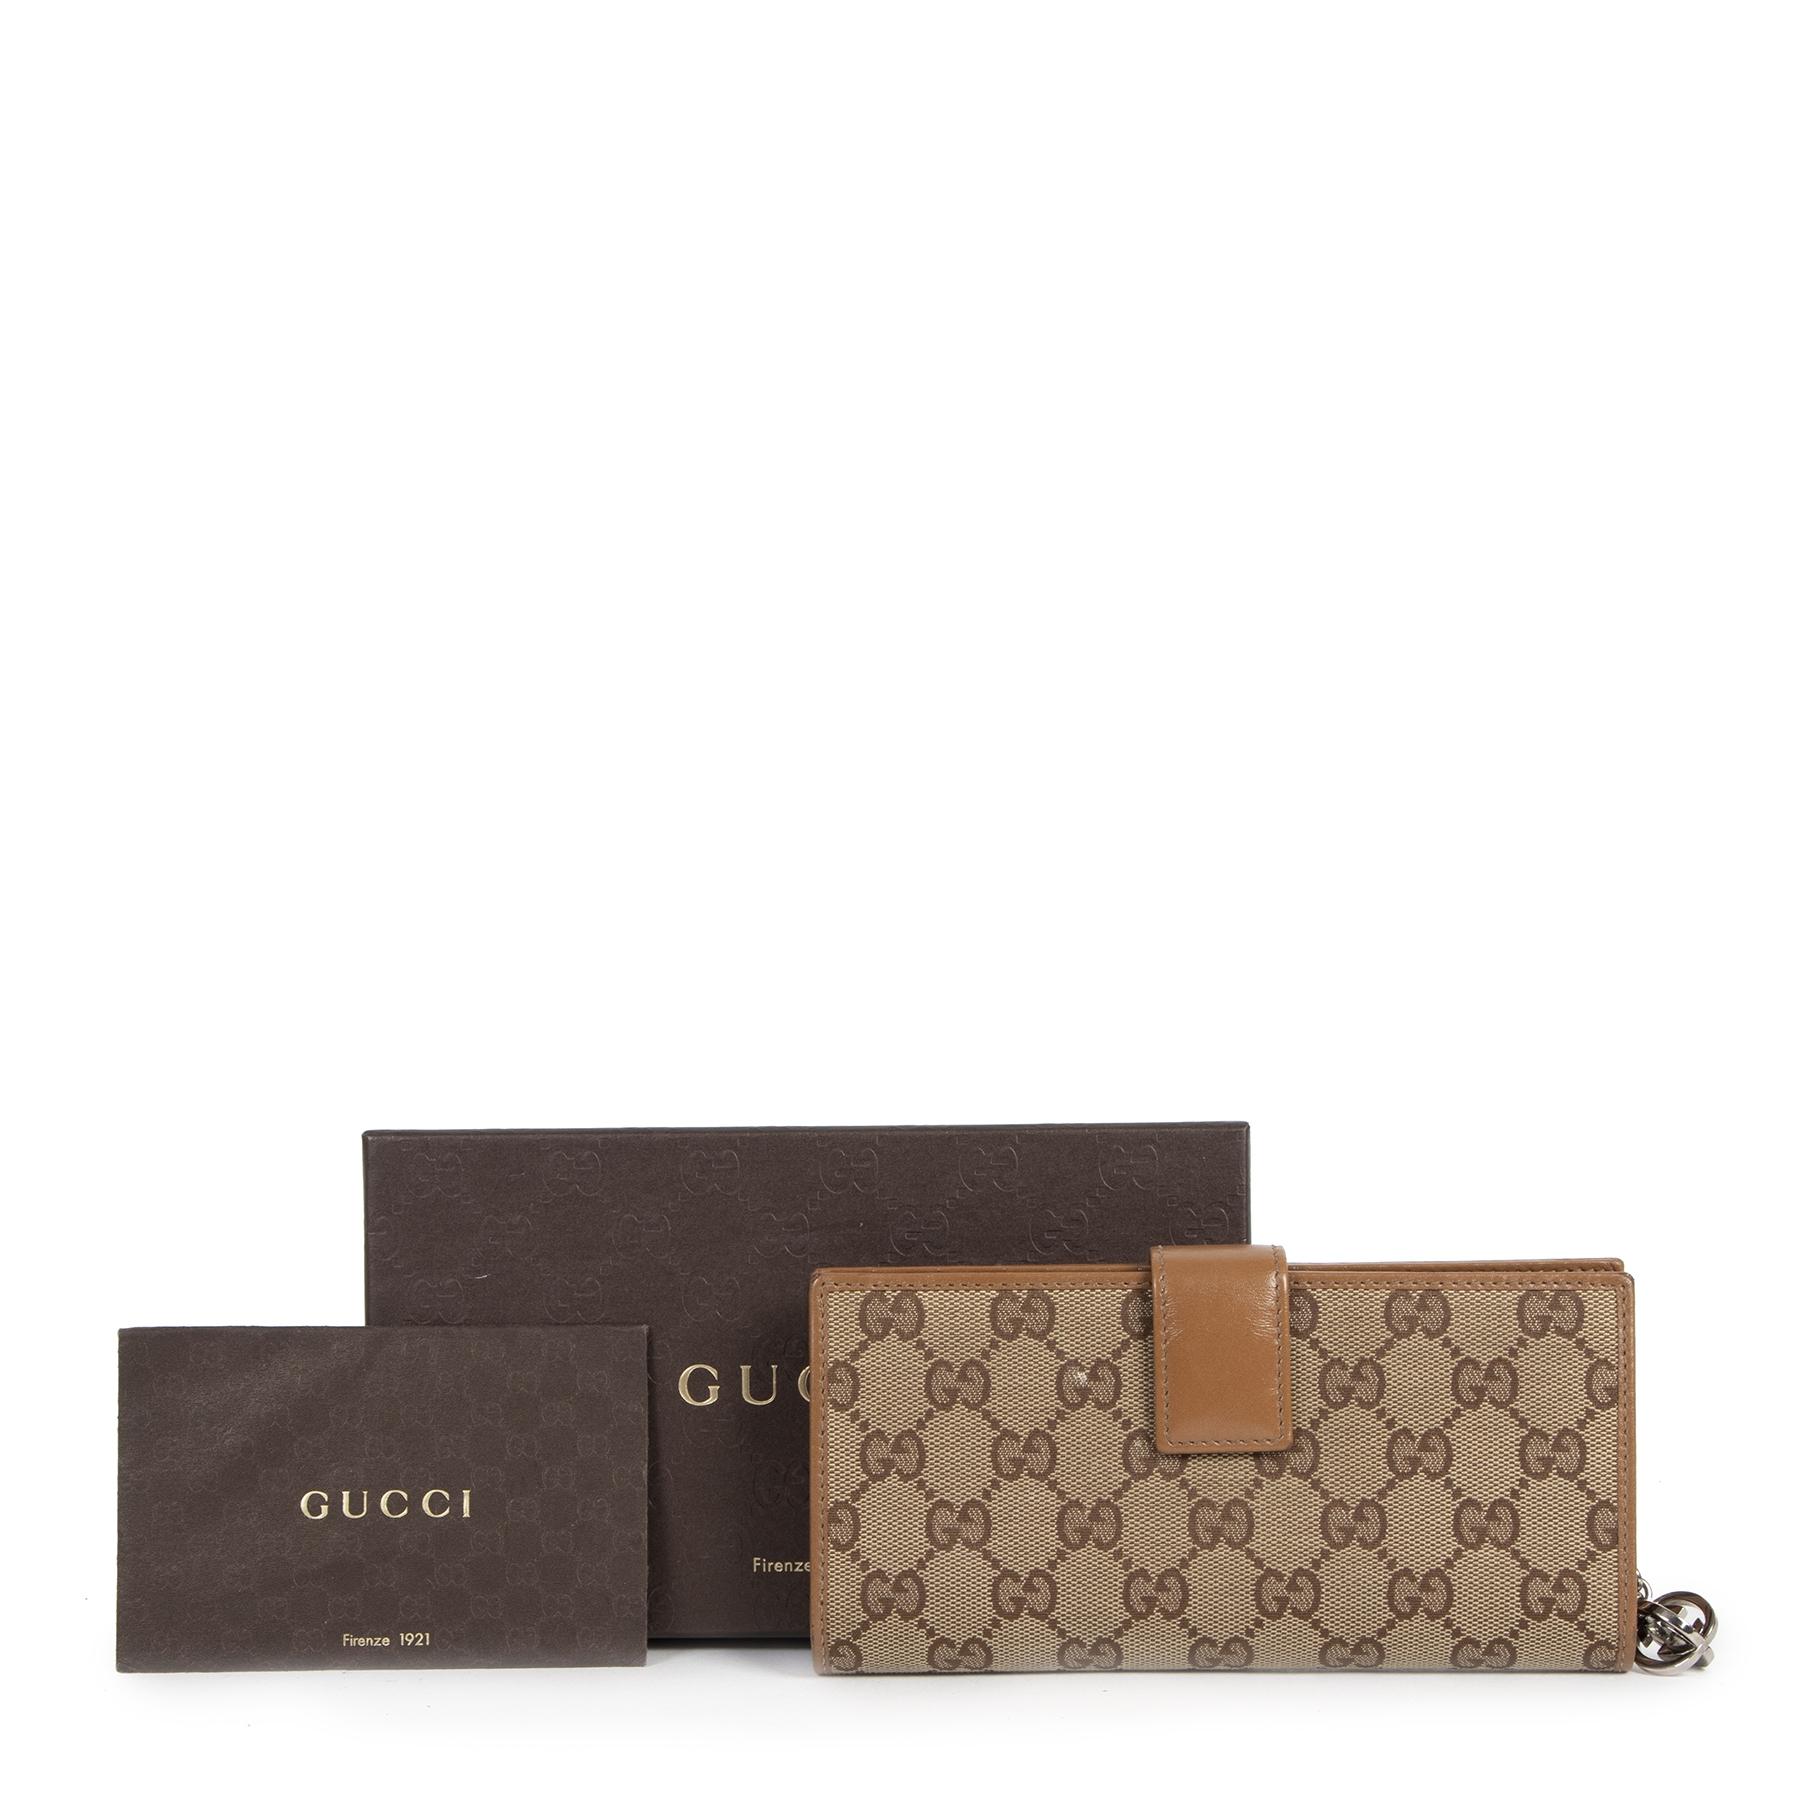 Very good preloved condition.

Gucci Monogram Canvas Wallet

Get yourself an amazing accessory by Gucci with this gorgeous monogram wallet. The wallet is crafted out of canvas and features the brand's signature 'GG' monogram pattern. Open the wallet